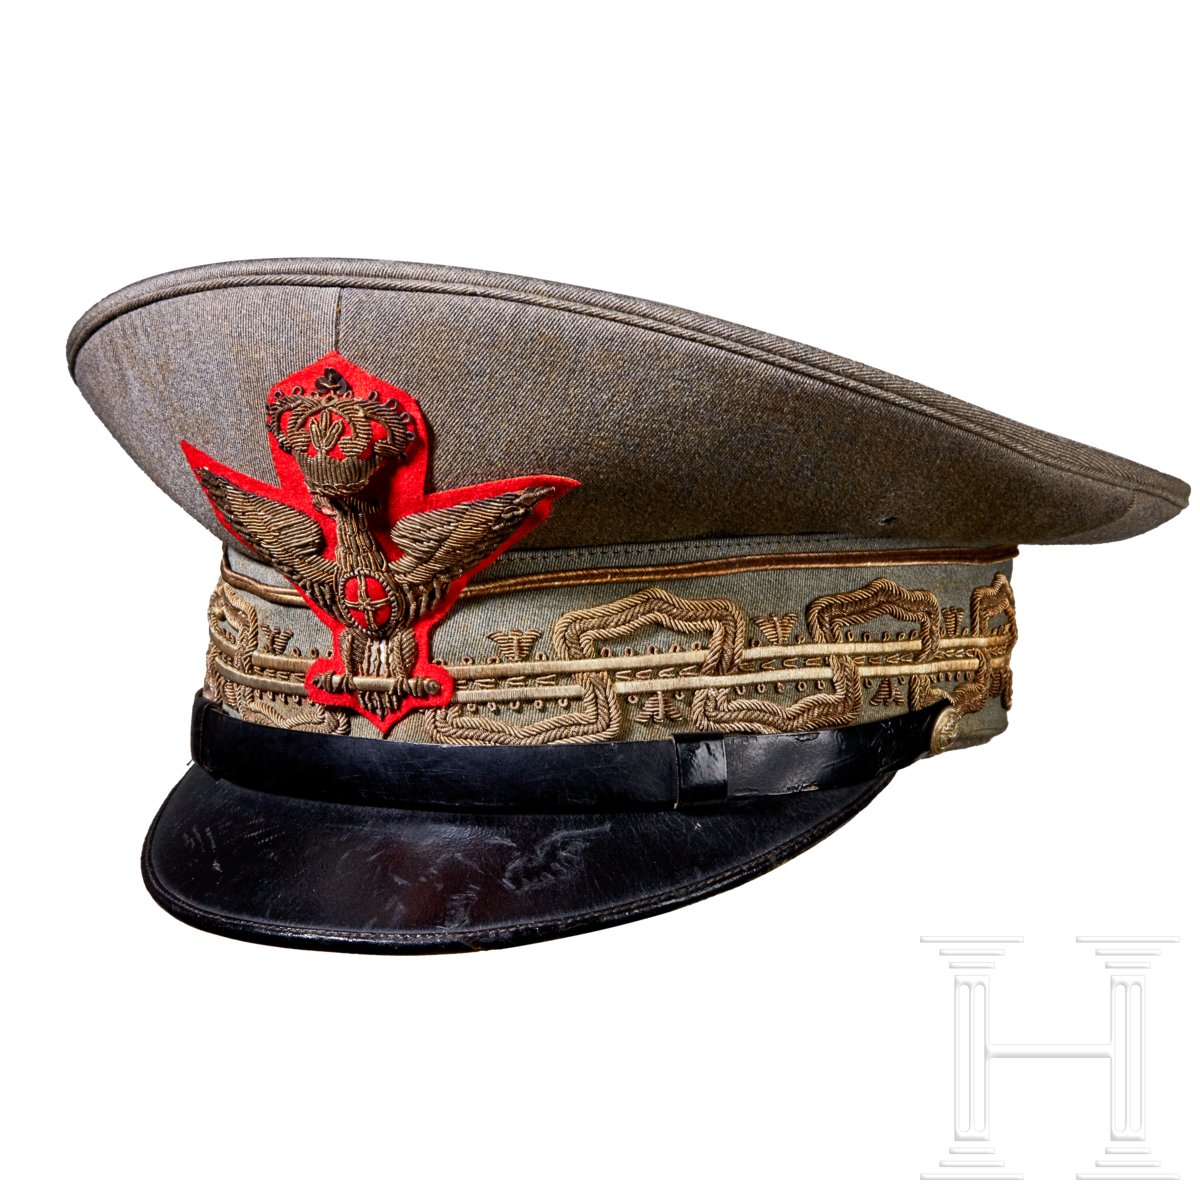 An Officer's General Rank Visor Cap with Storage Box - Image 2 of 7